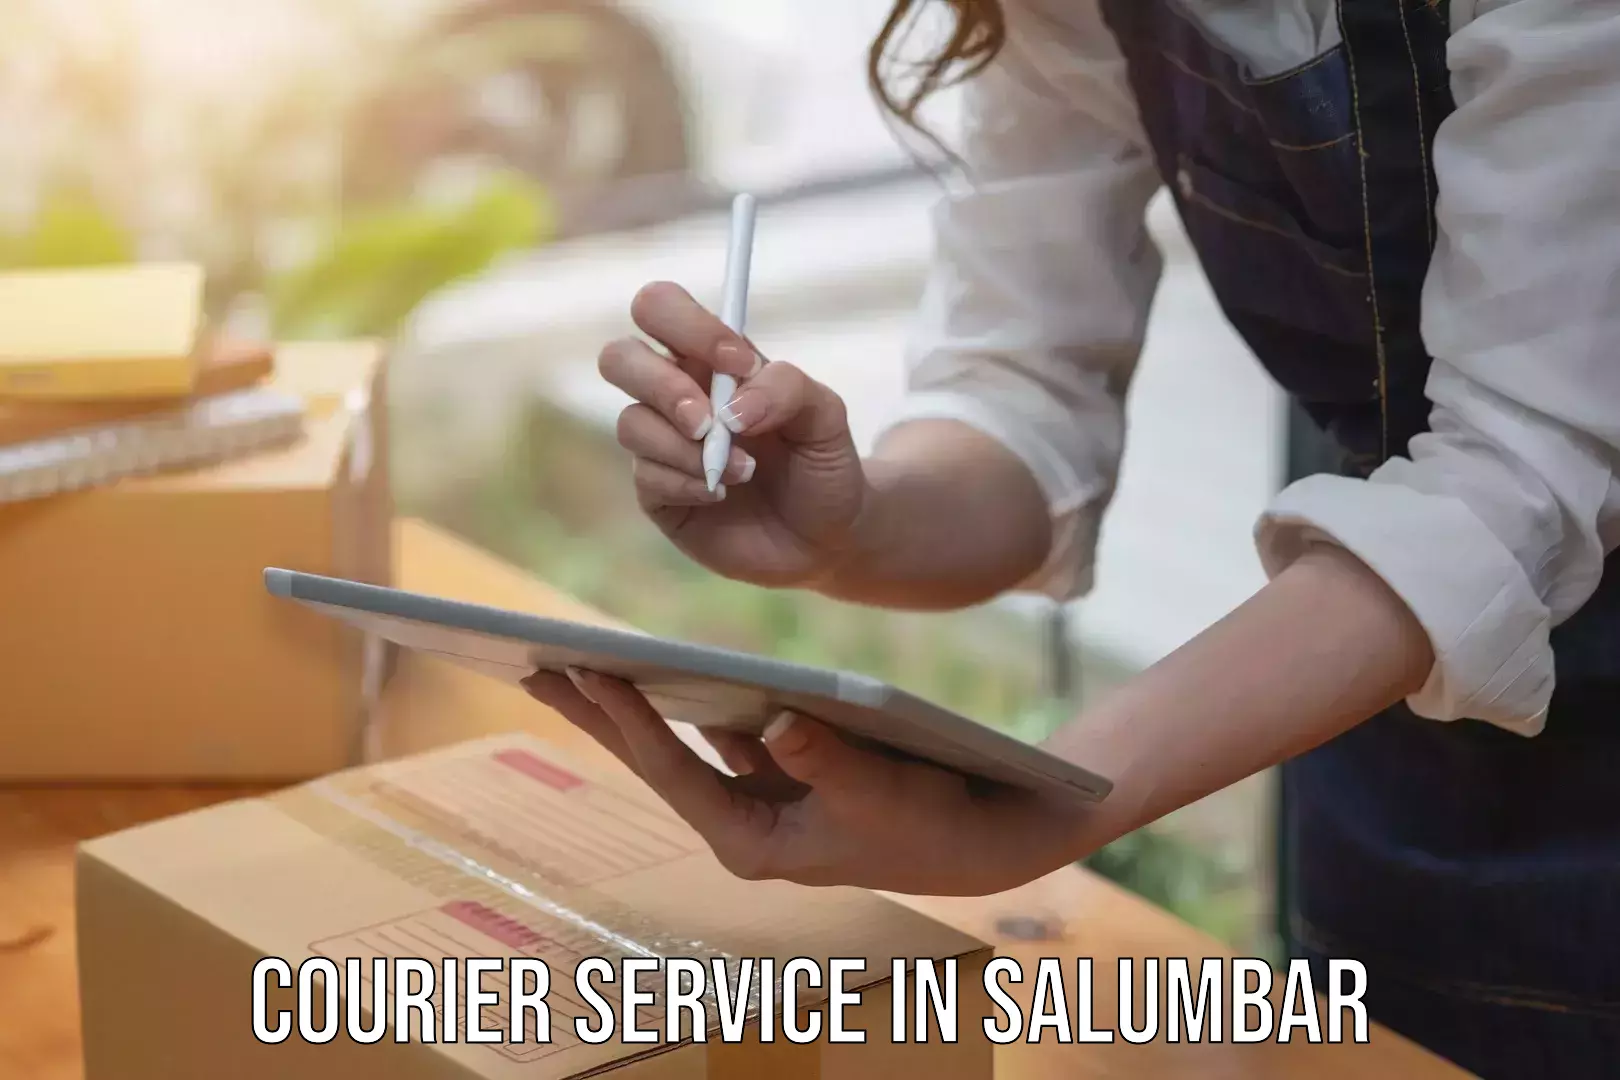 High-quality delivery services in Salumbar